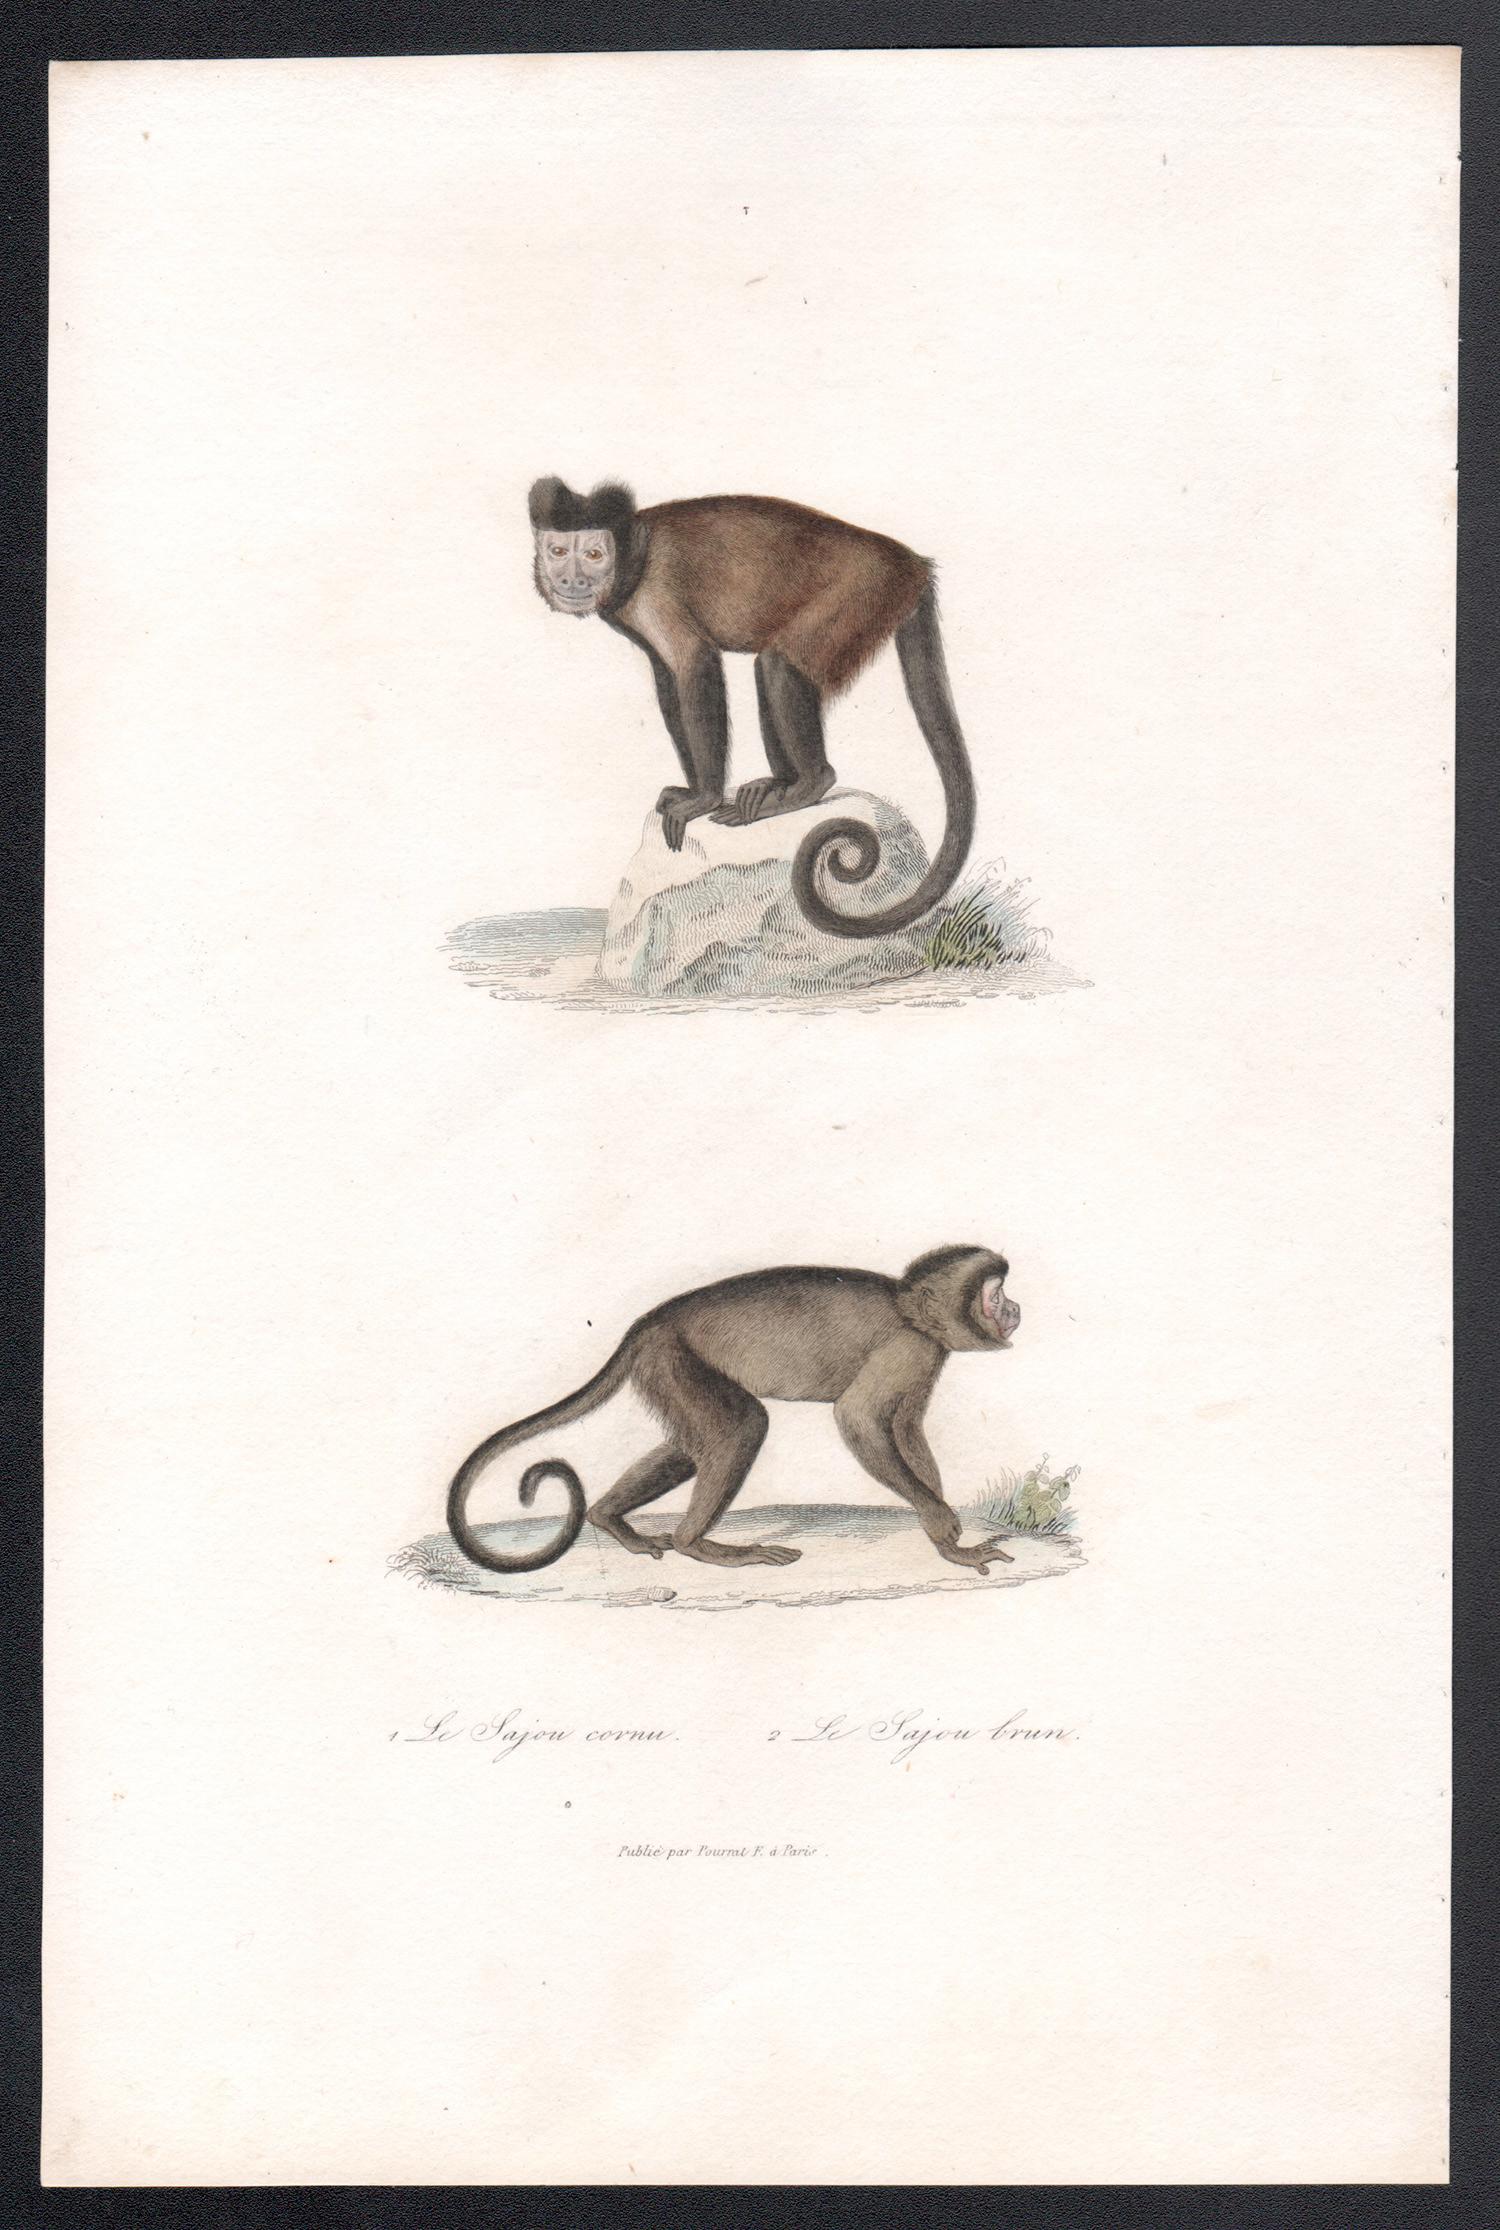 Capuchins, mid 19th French century animal engraving - Print by Unknown